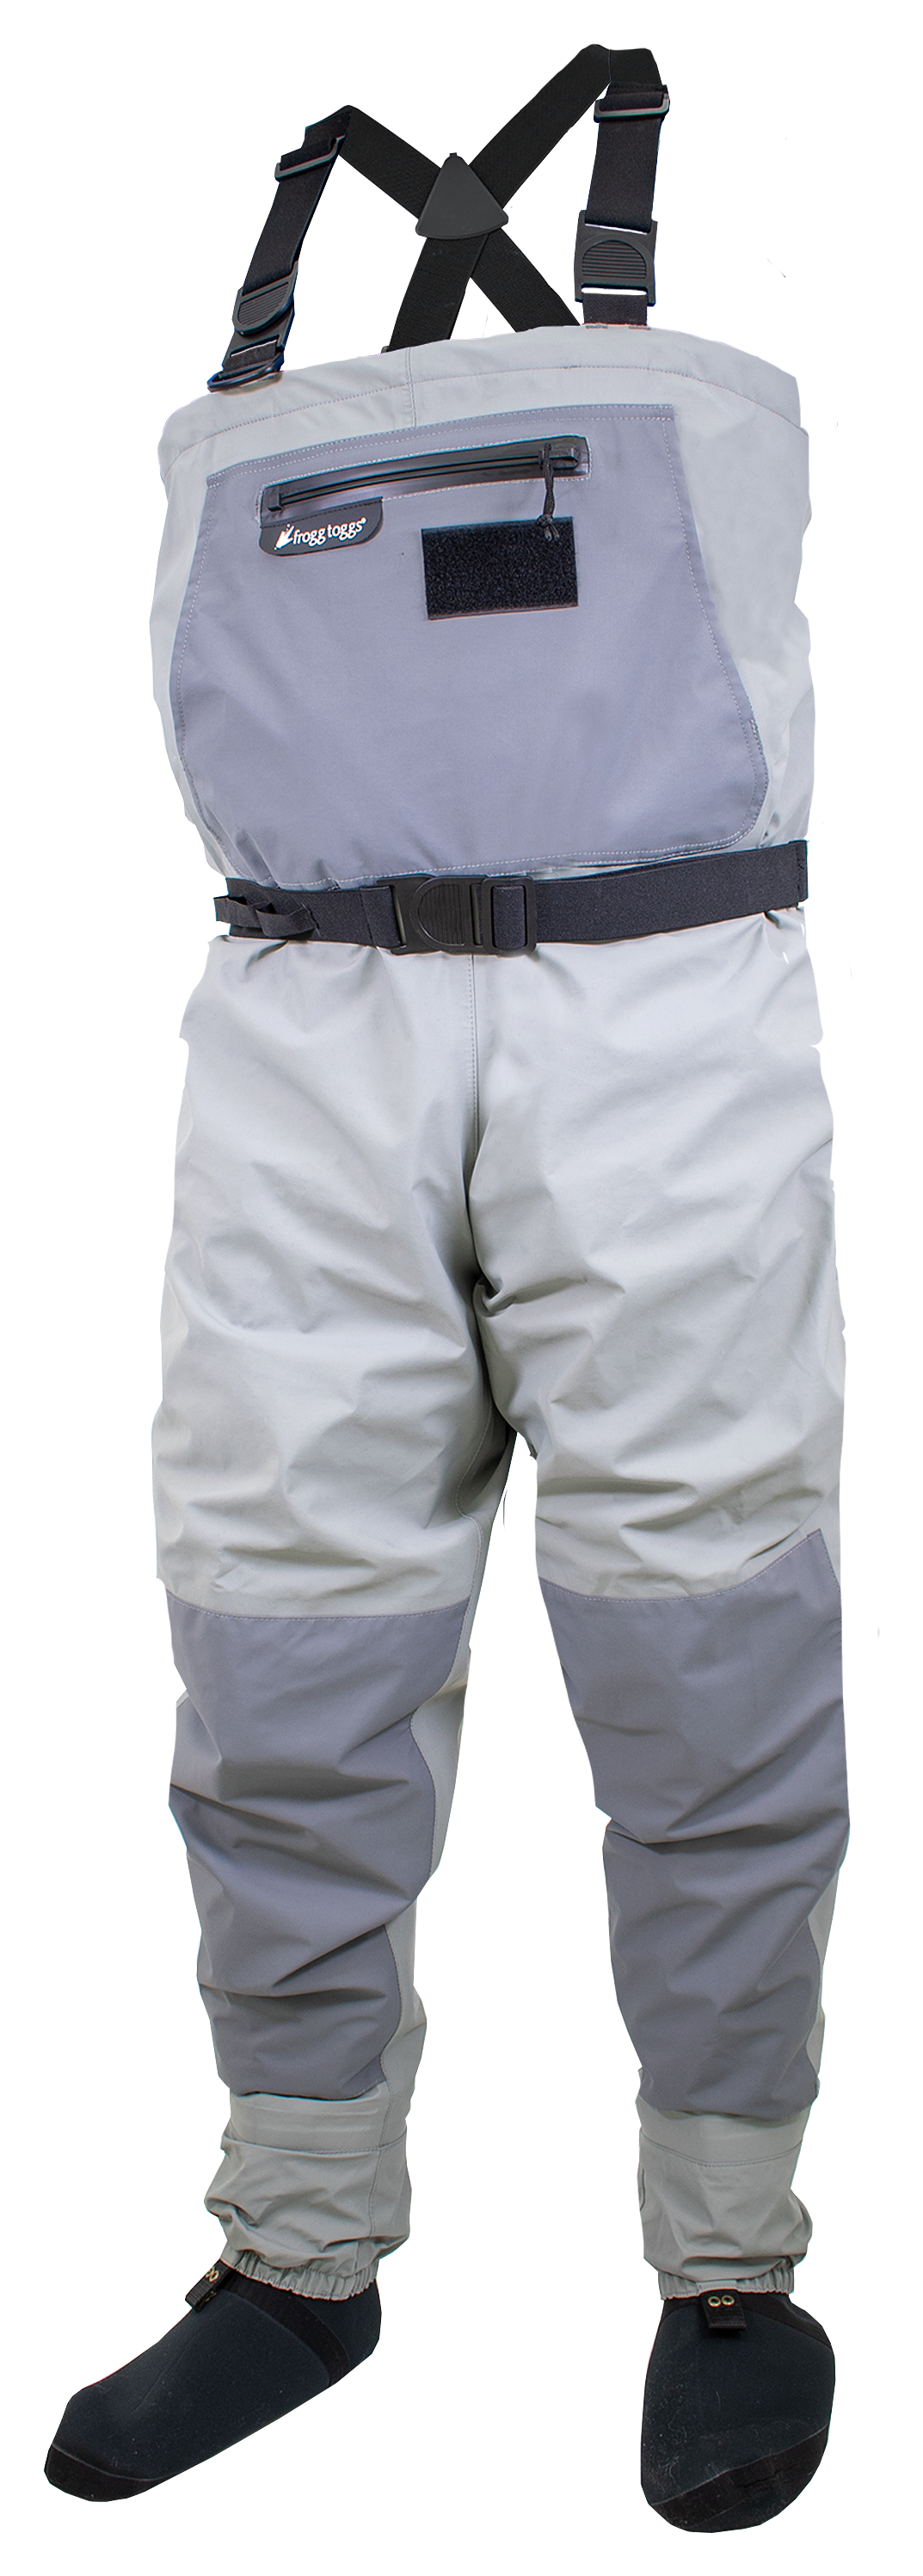 buy cheapest store Unisex Outdoor Fishing Waders Stocking Foot